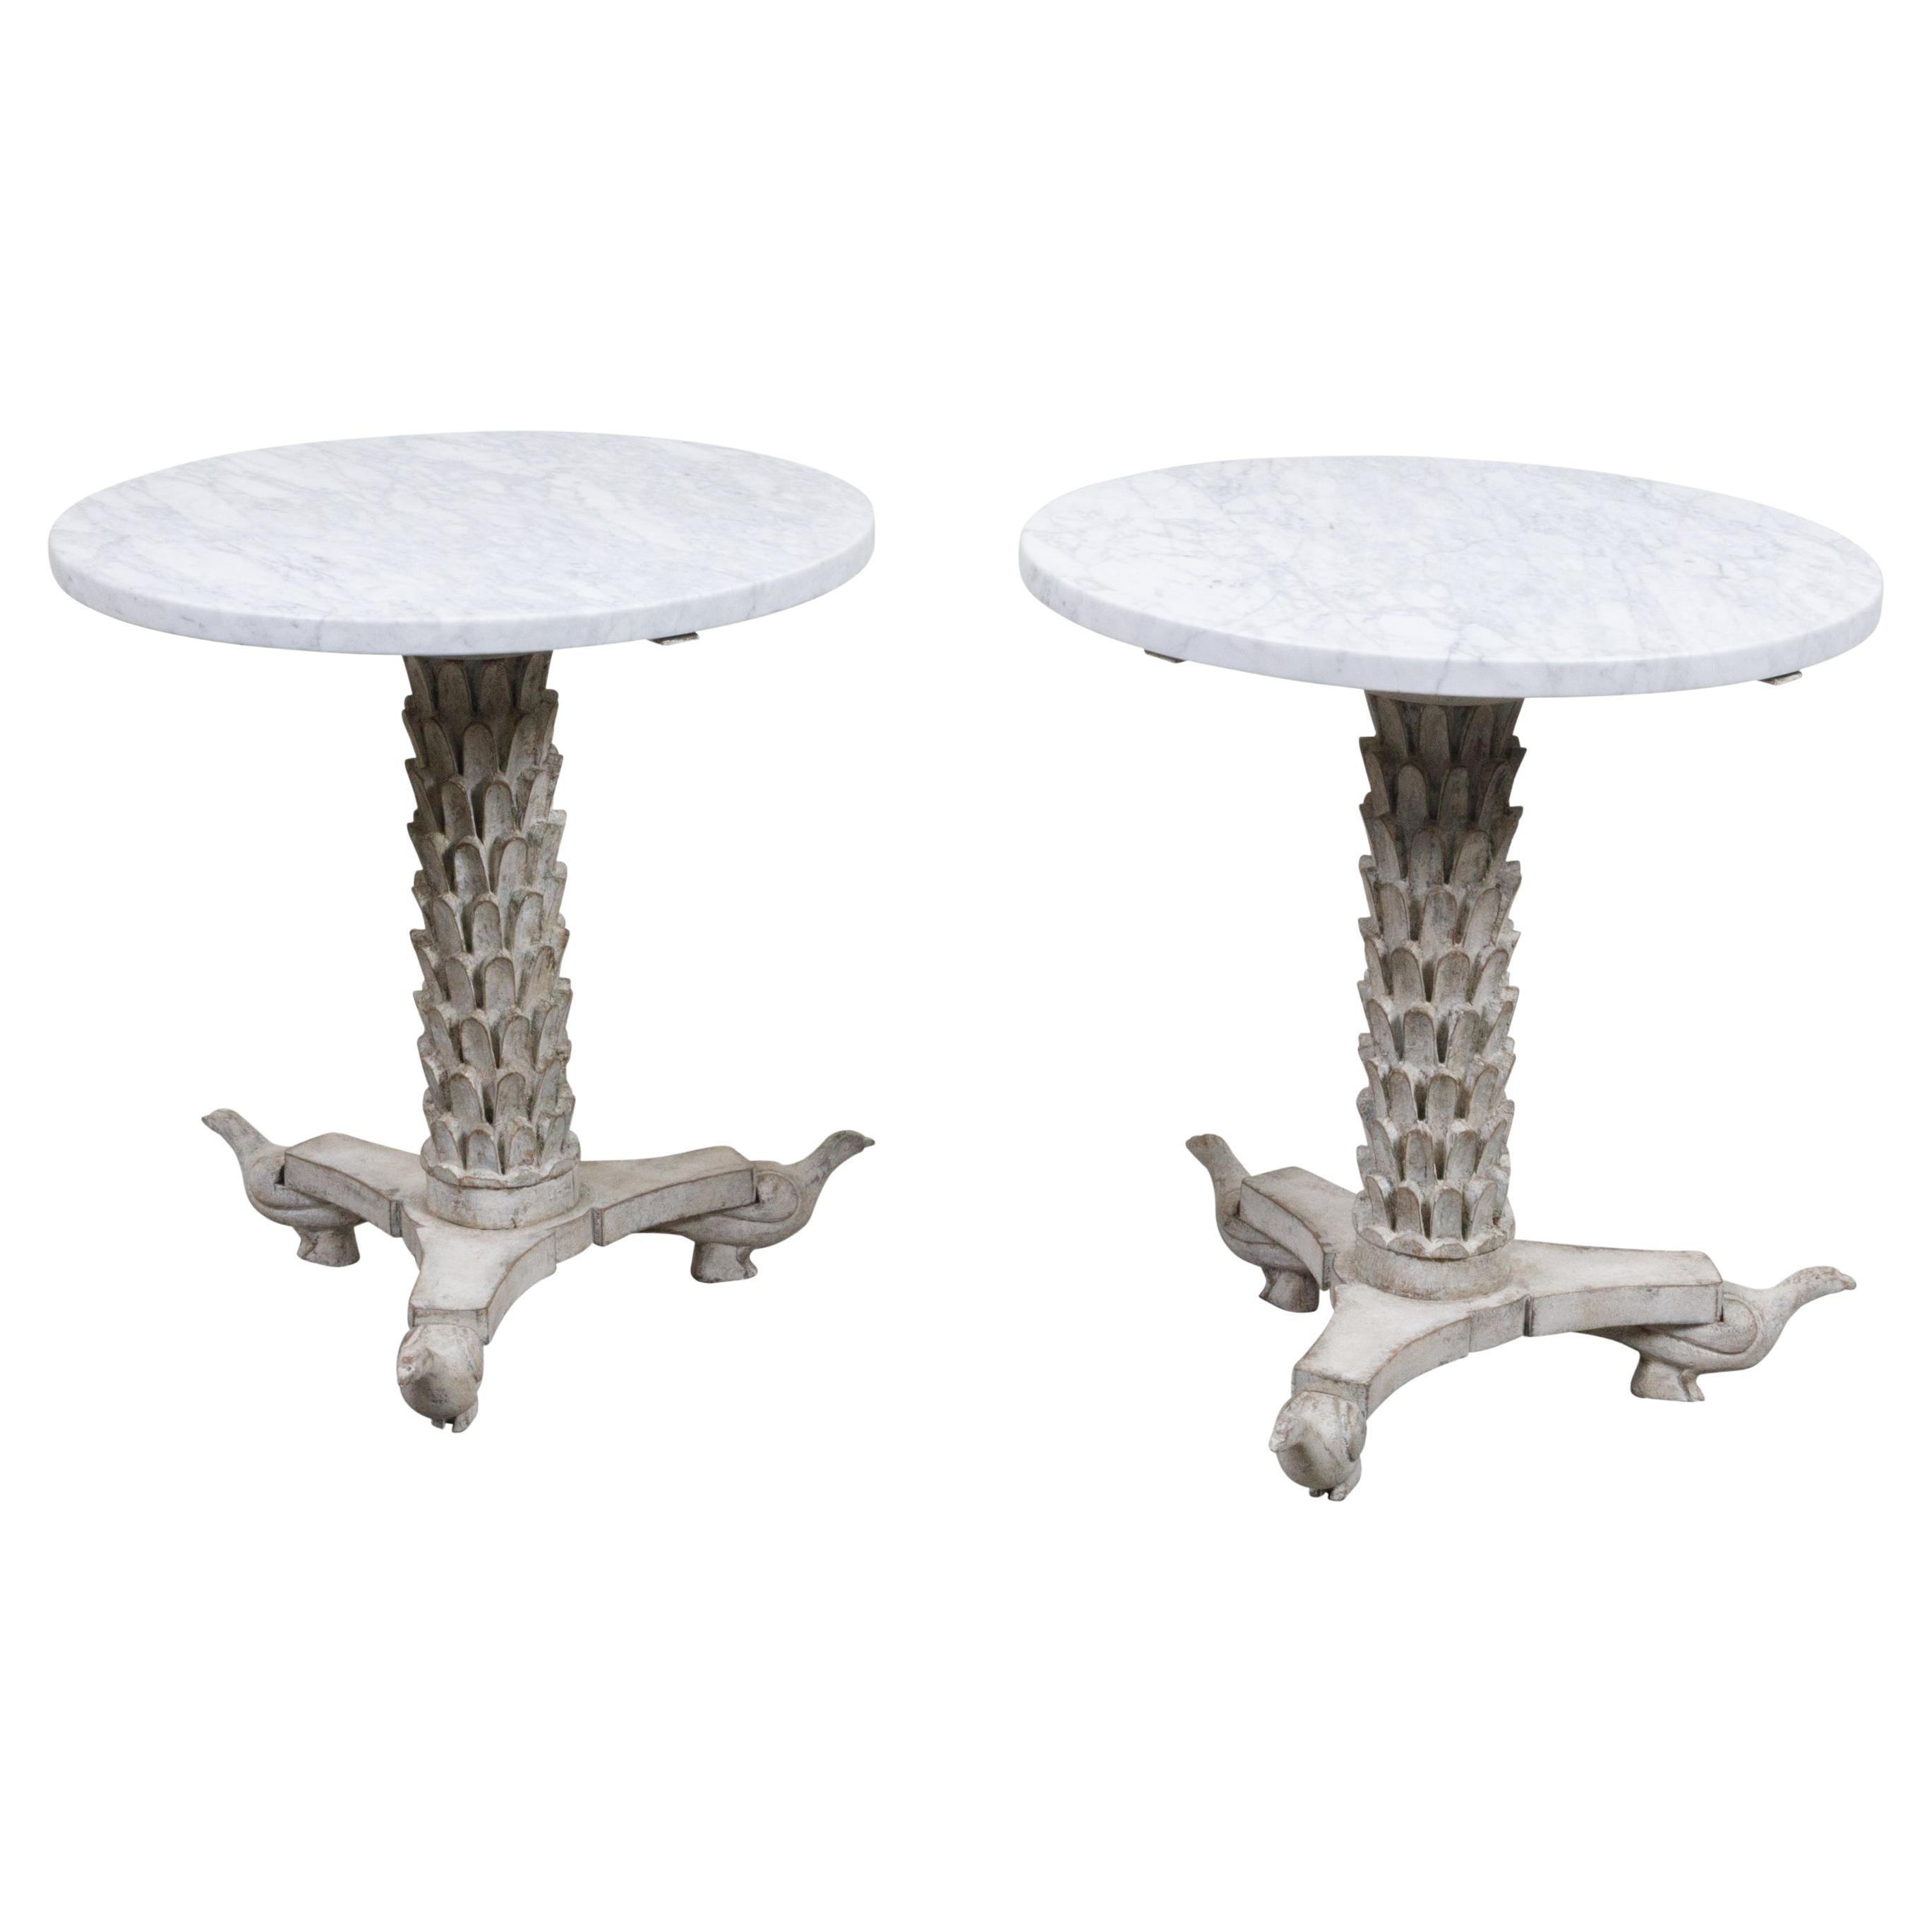 Pair of Italian Side Tables with White Marble Tops and Carved Palm Tree Bases For Sale